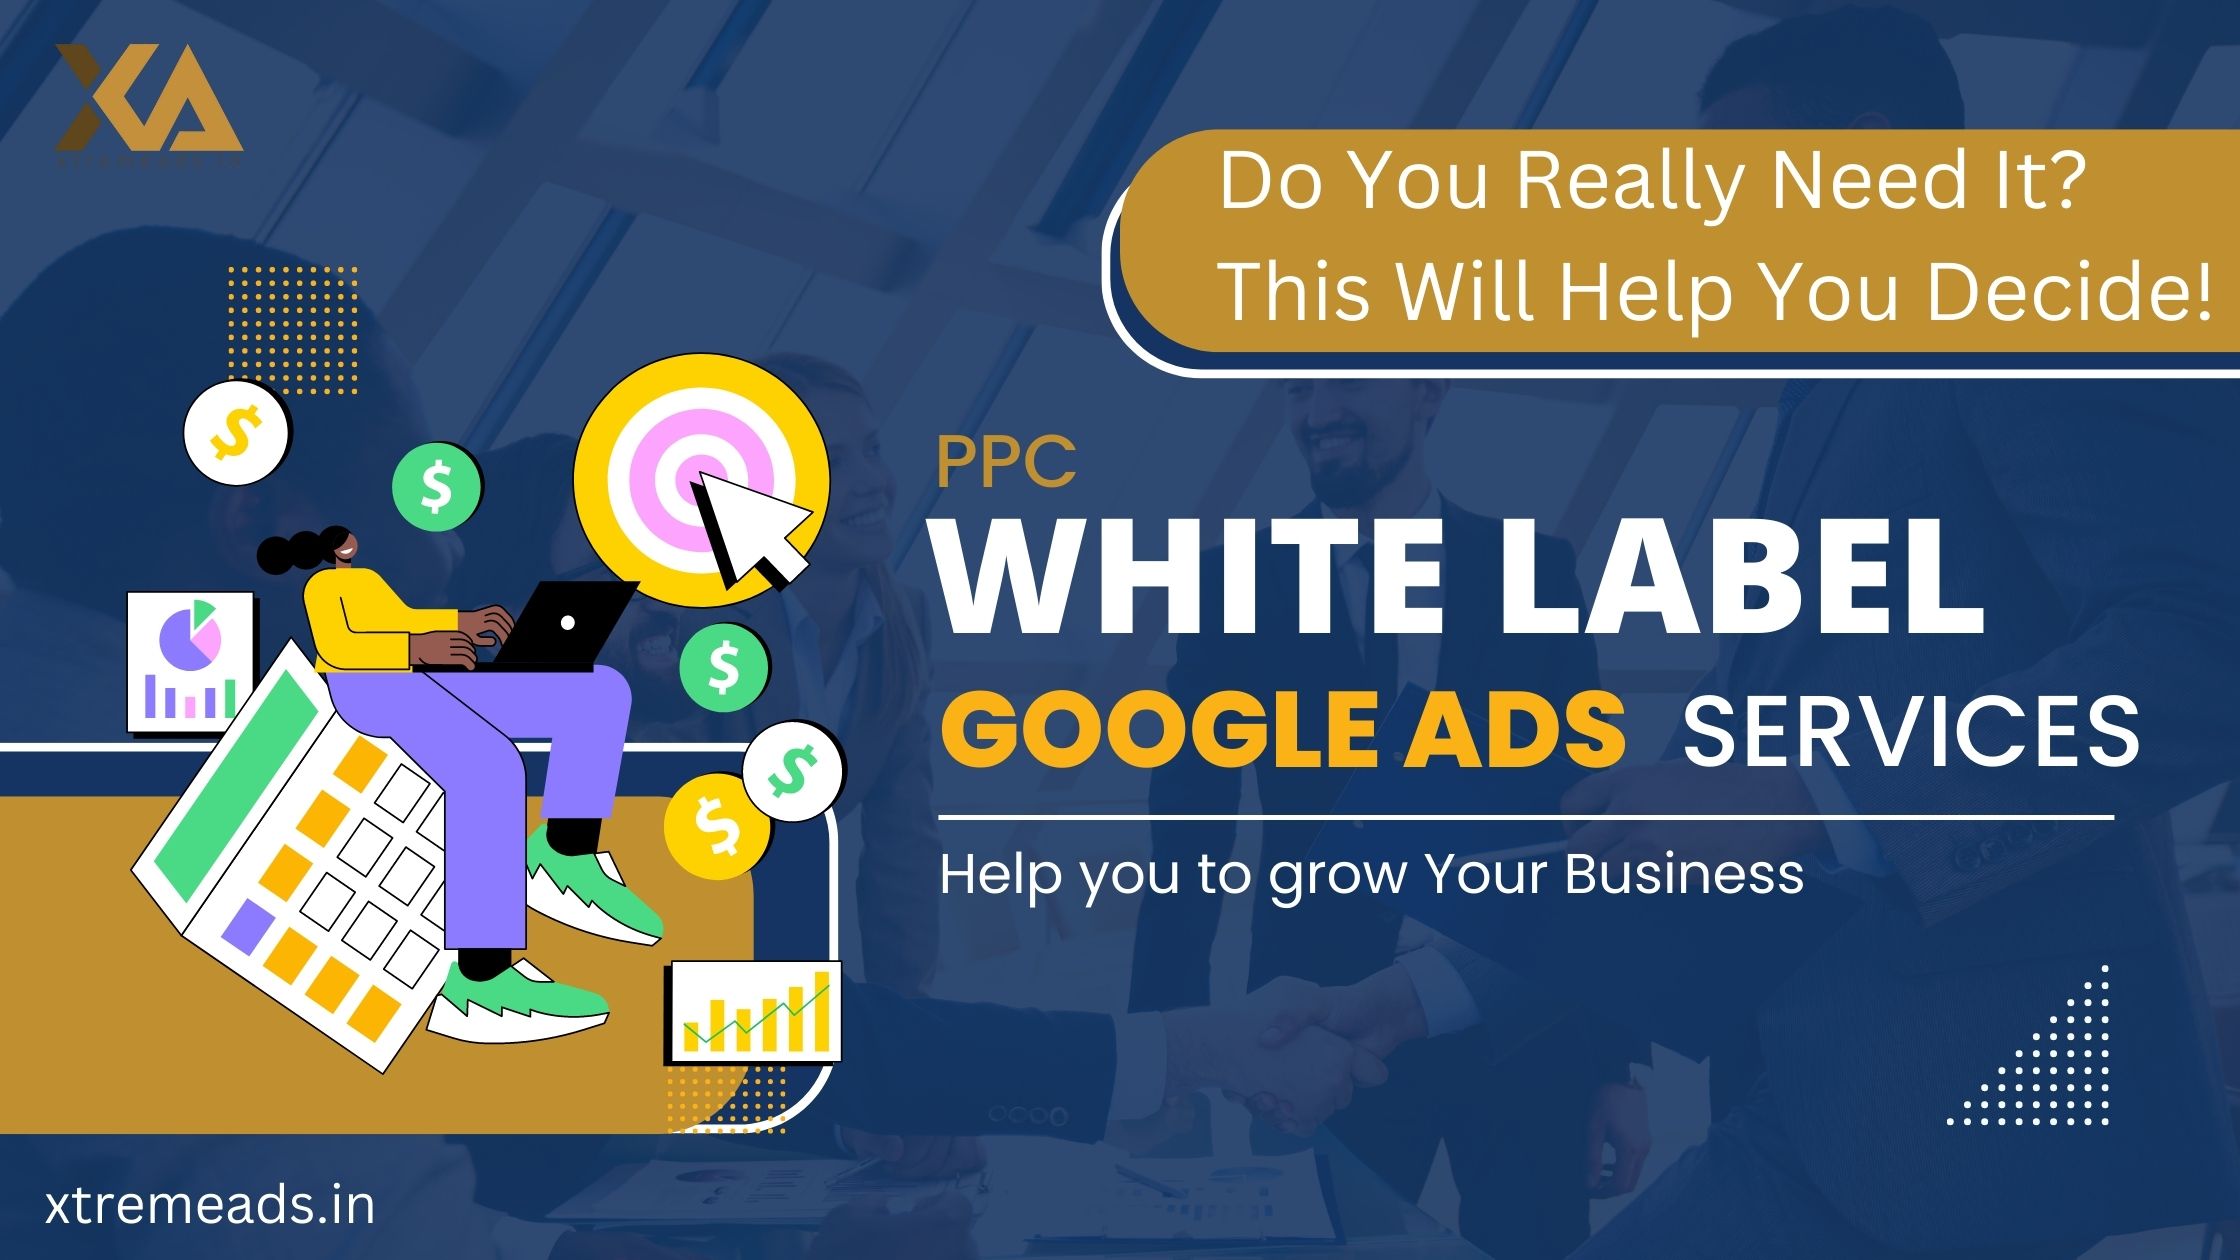 White label Google Ads services : Xtremeads.in